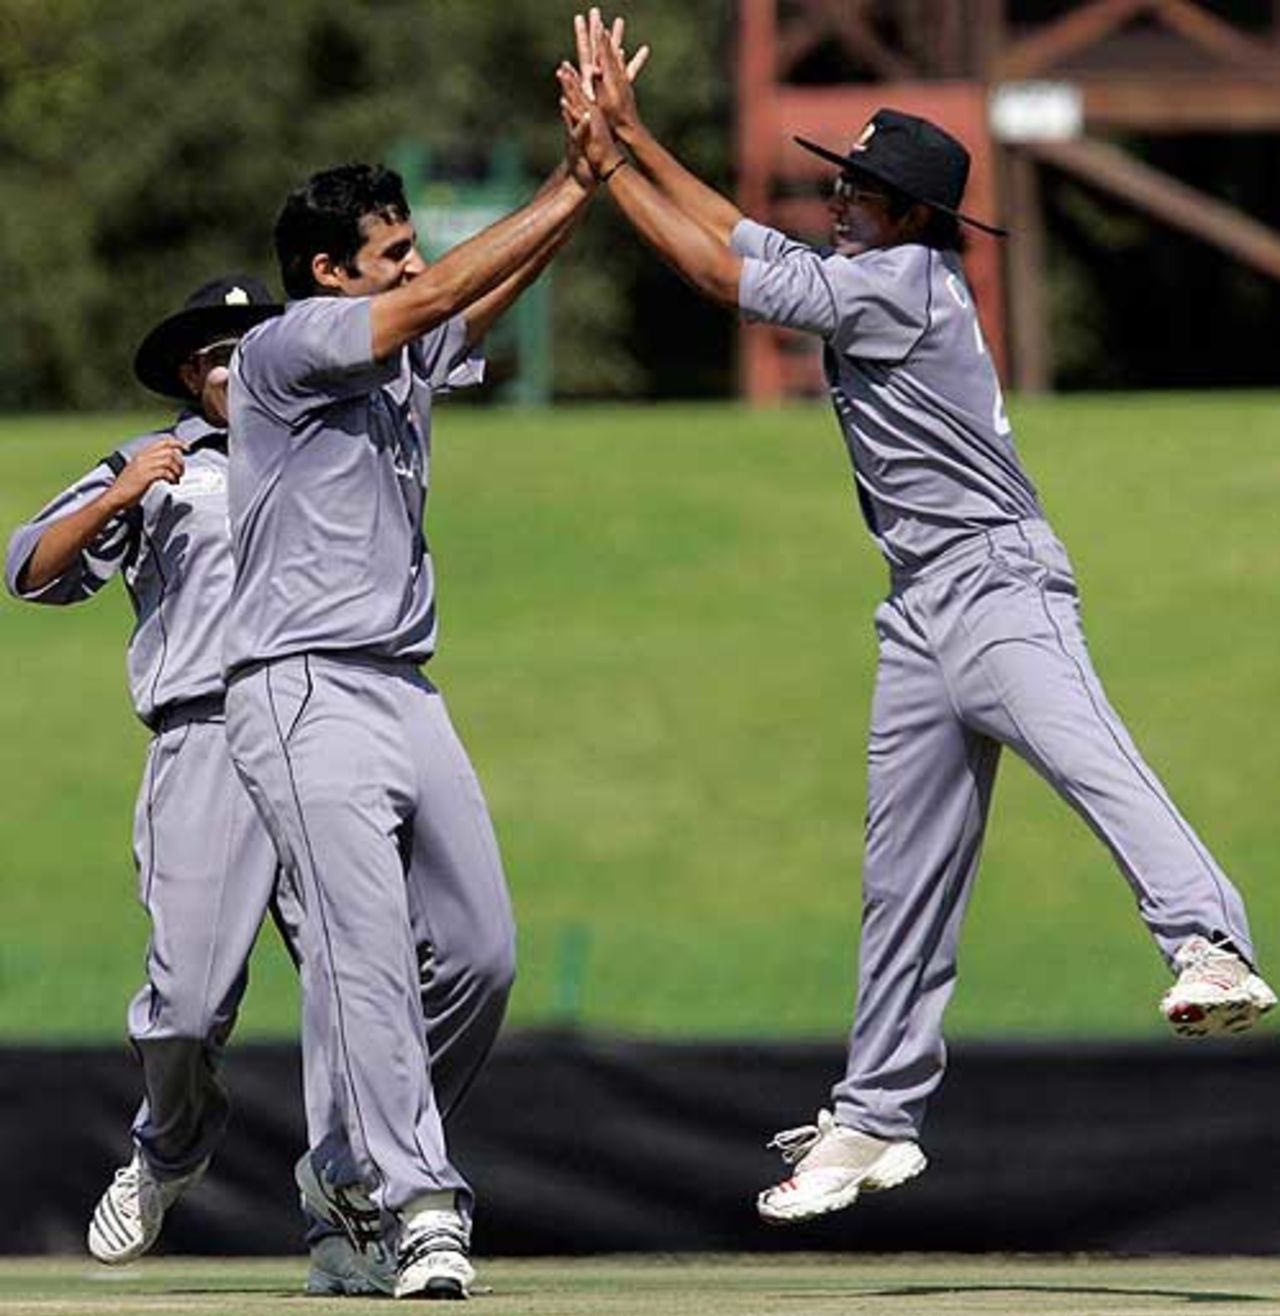 Zahid Shah and Owais Hameed celebrate, Netherlands v United Arab Emirates, ICC World Cup Qualifiers, Potchefstroom, April 4, 2009
